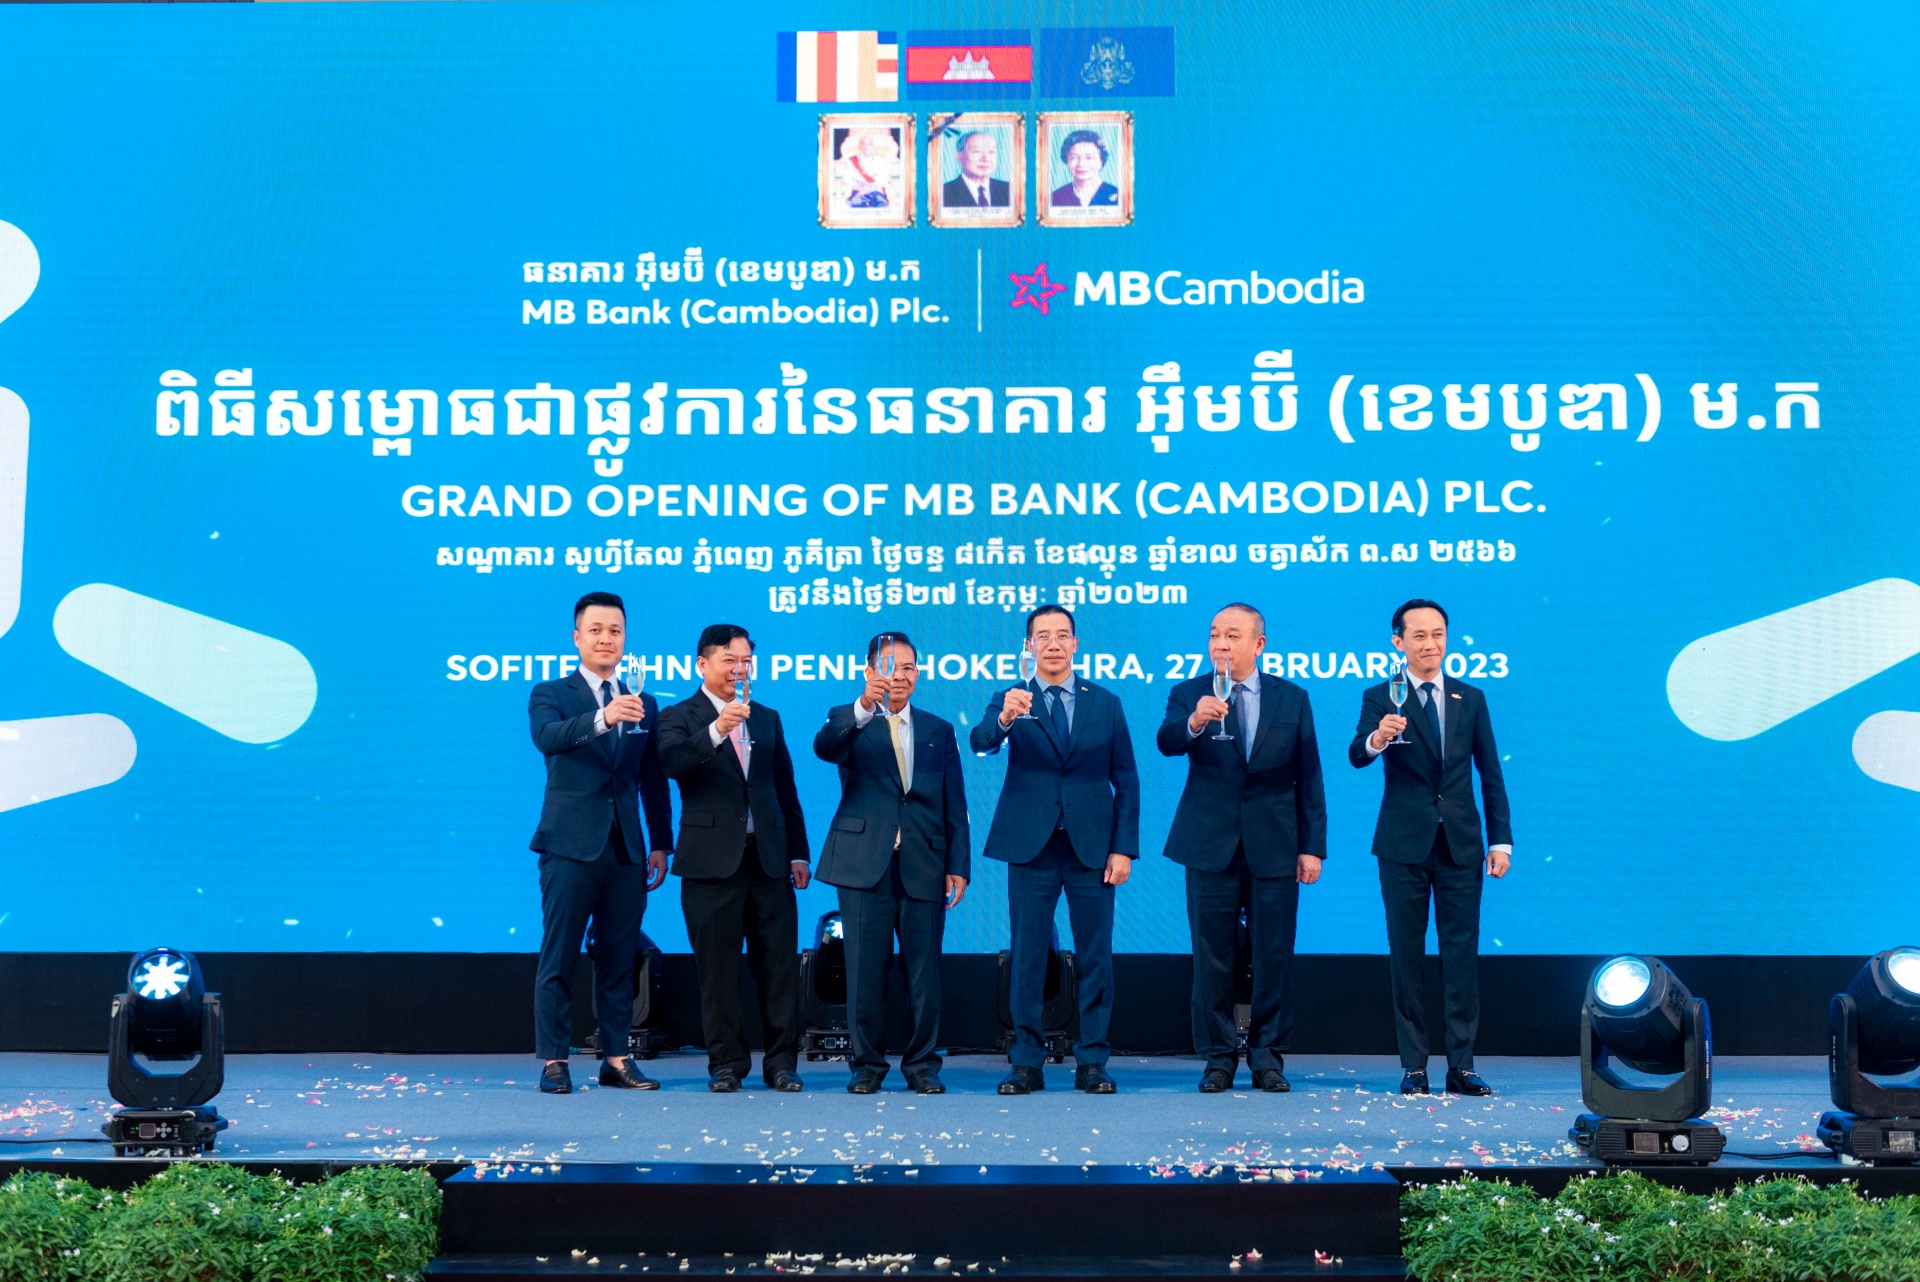 MBCambodia officially launches